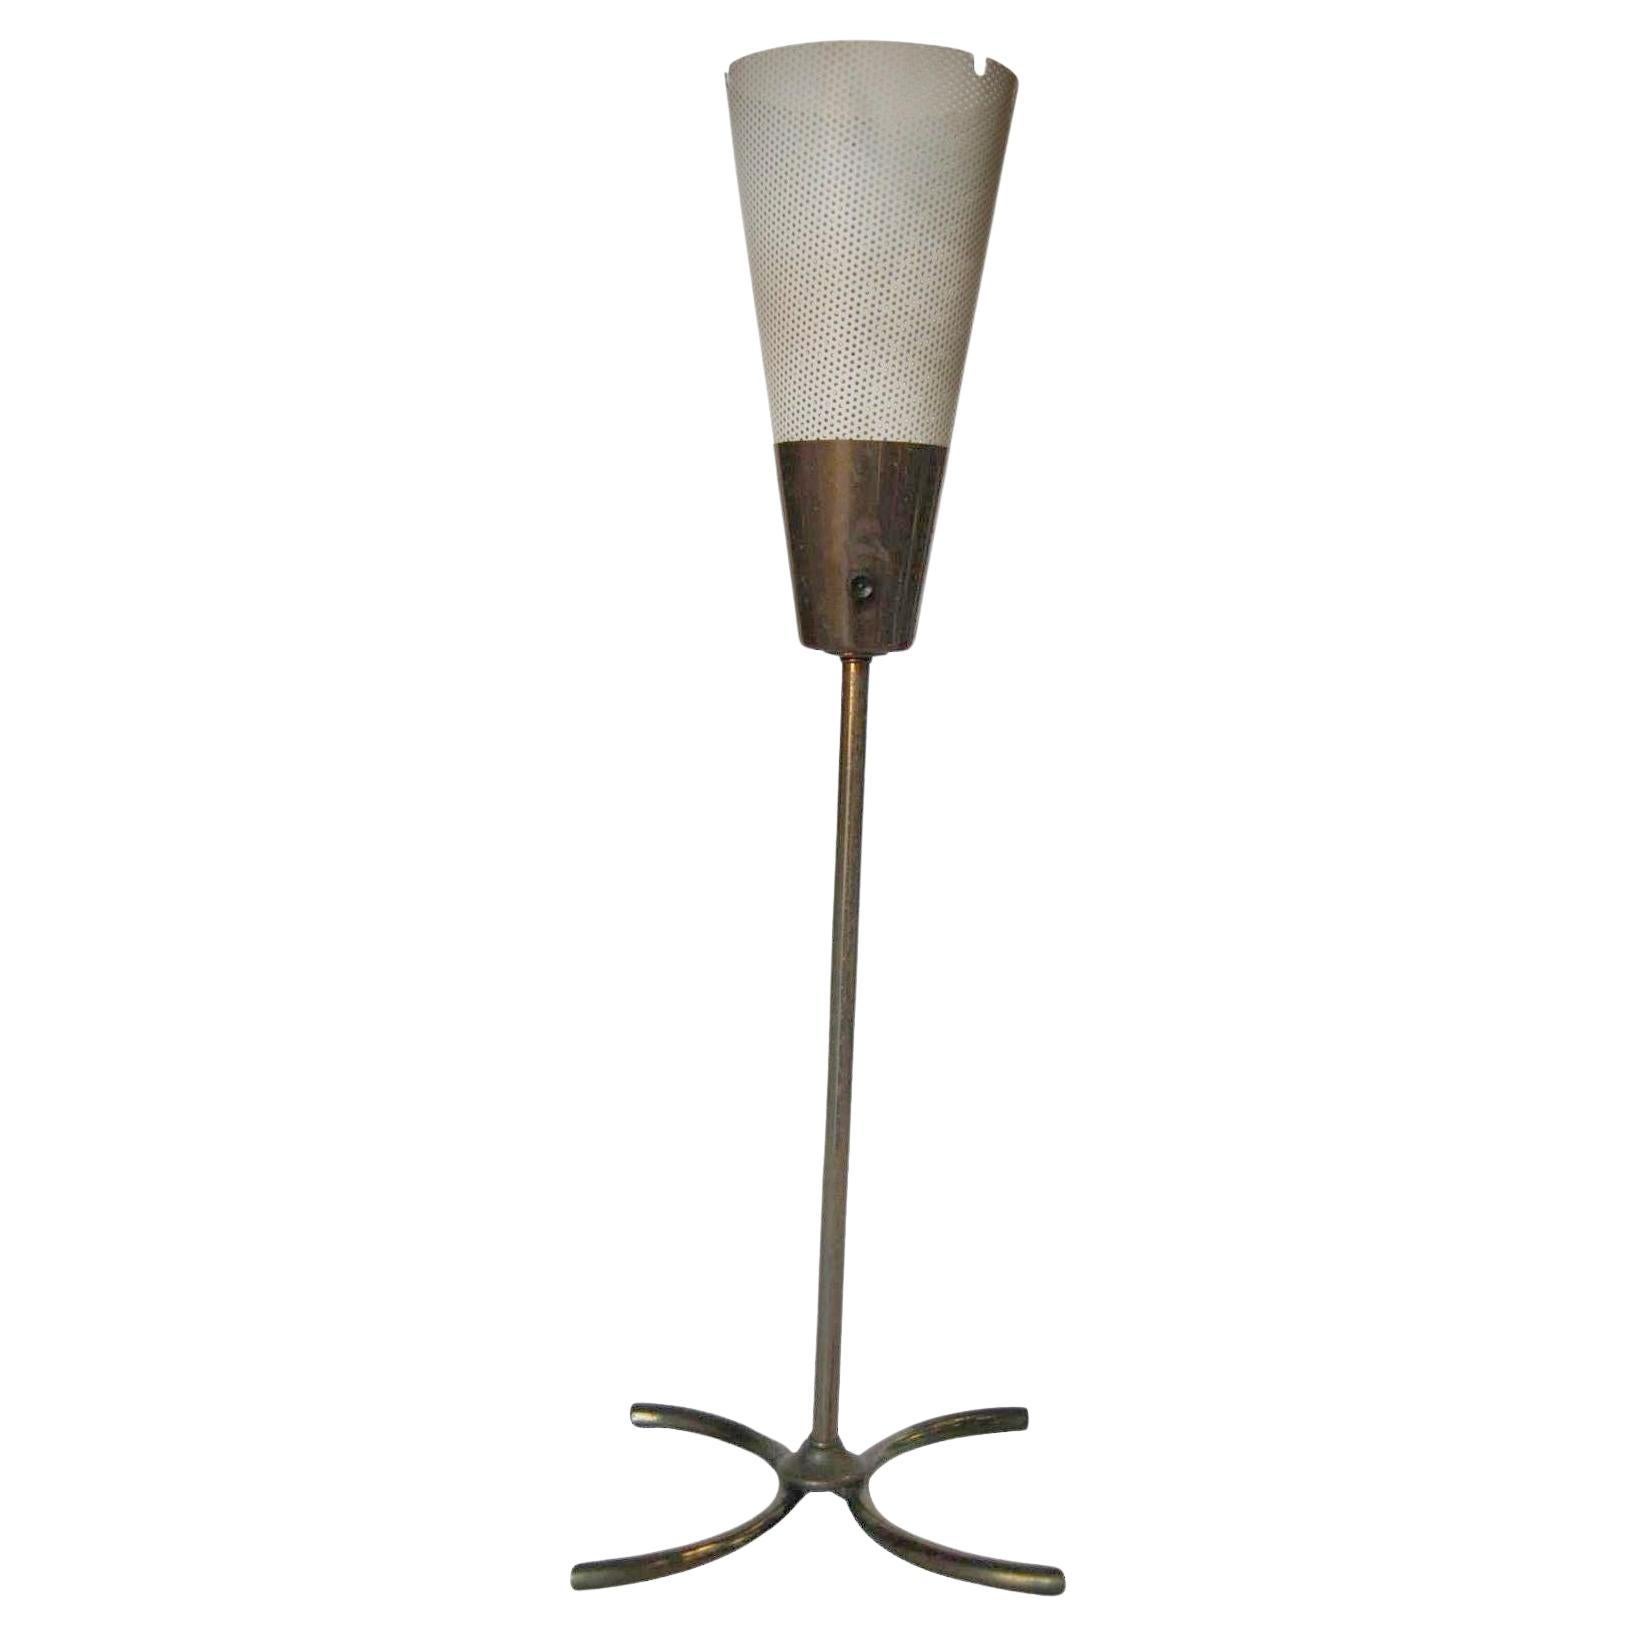 Midcentury Brass Free Standing Torchiere Table Lamp with Perforated Cone Shade